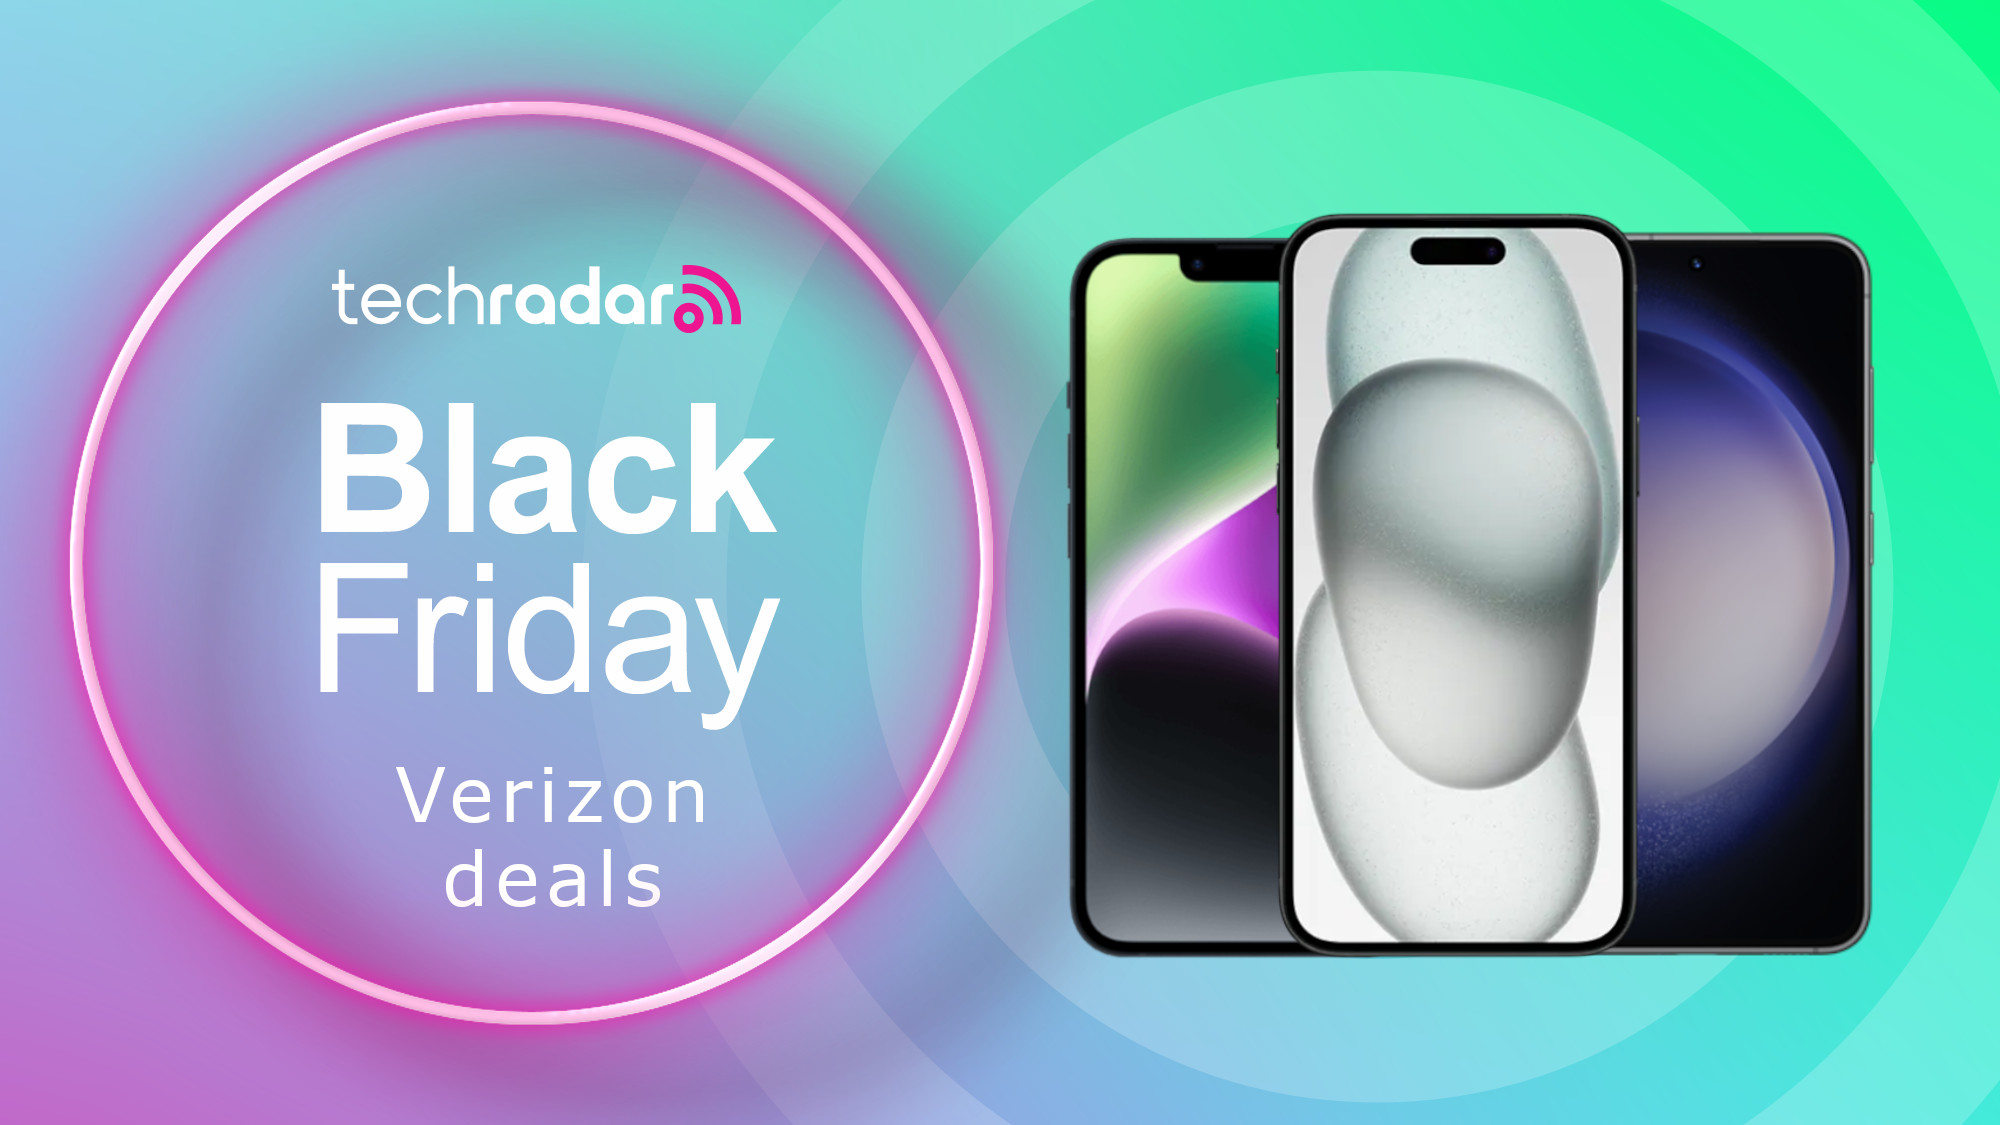 Verizon's new pre-Black Friday deal is a nice surprise for gamers -  PhoneArena